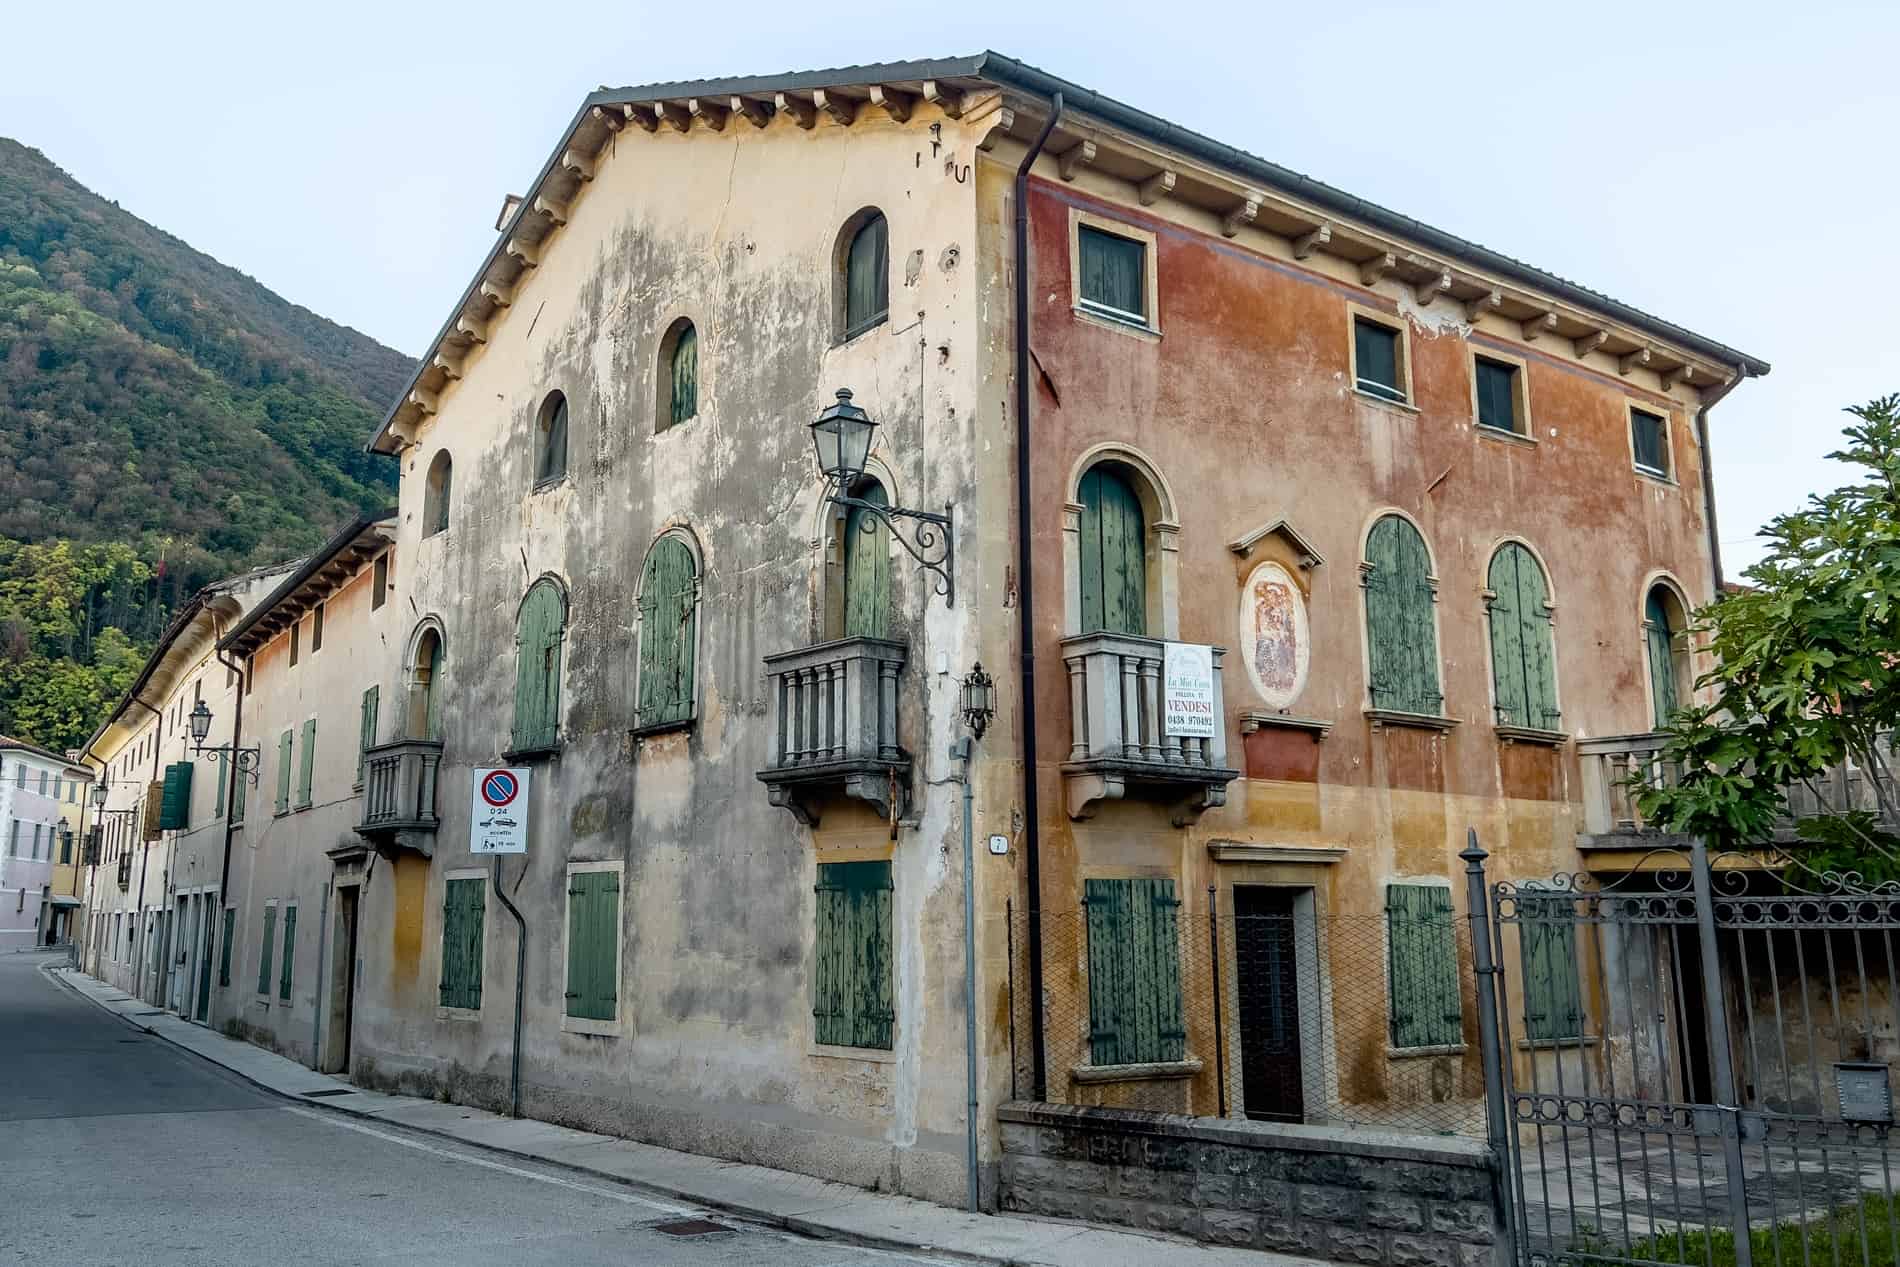 Aged structures with faded orange and yellow paint and green shutters in the village of Follina, Italy. 